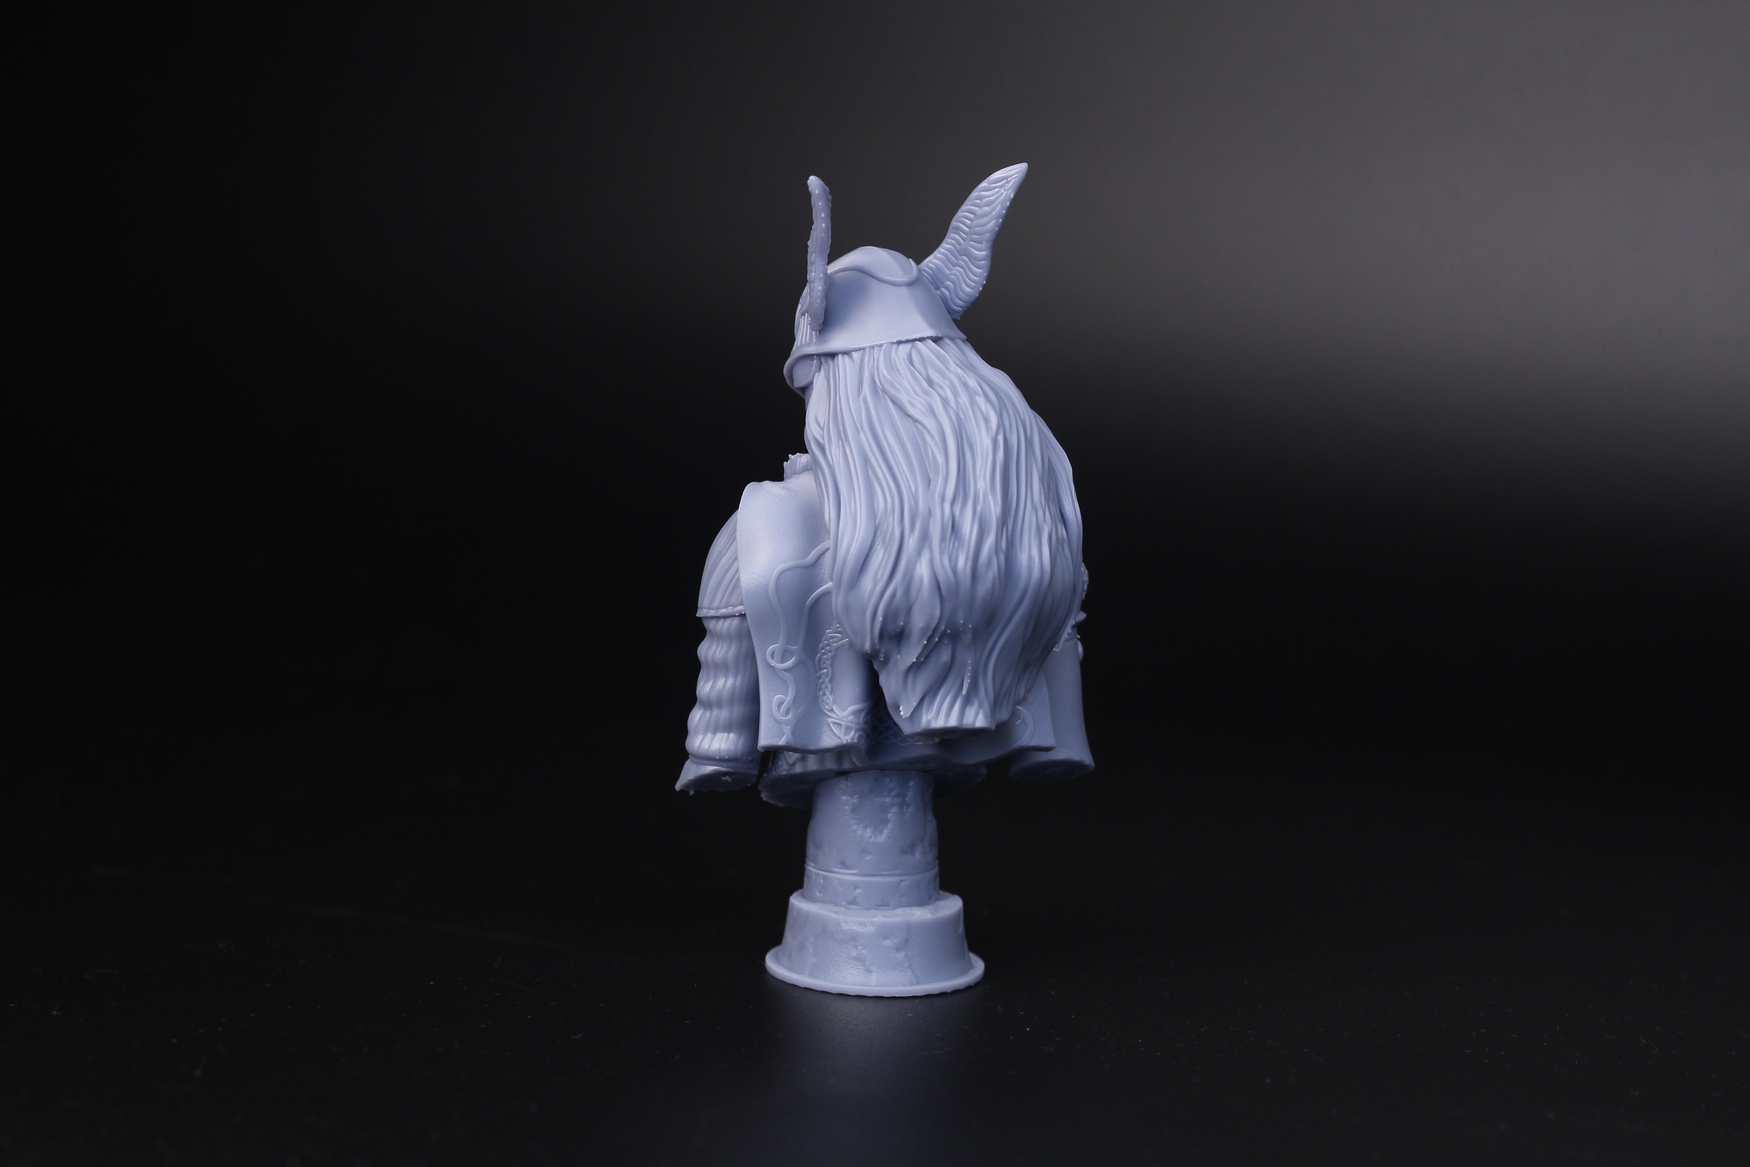 Malenia Bust printed on Anycubic M35 | Anycubic Photon M3 Review: Bridging the gap